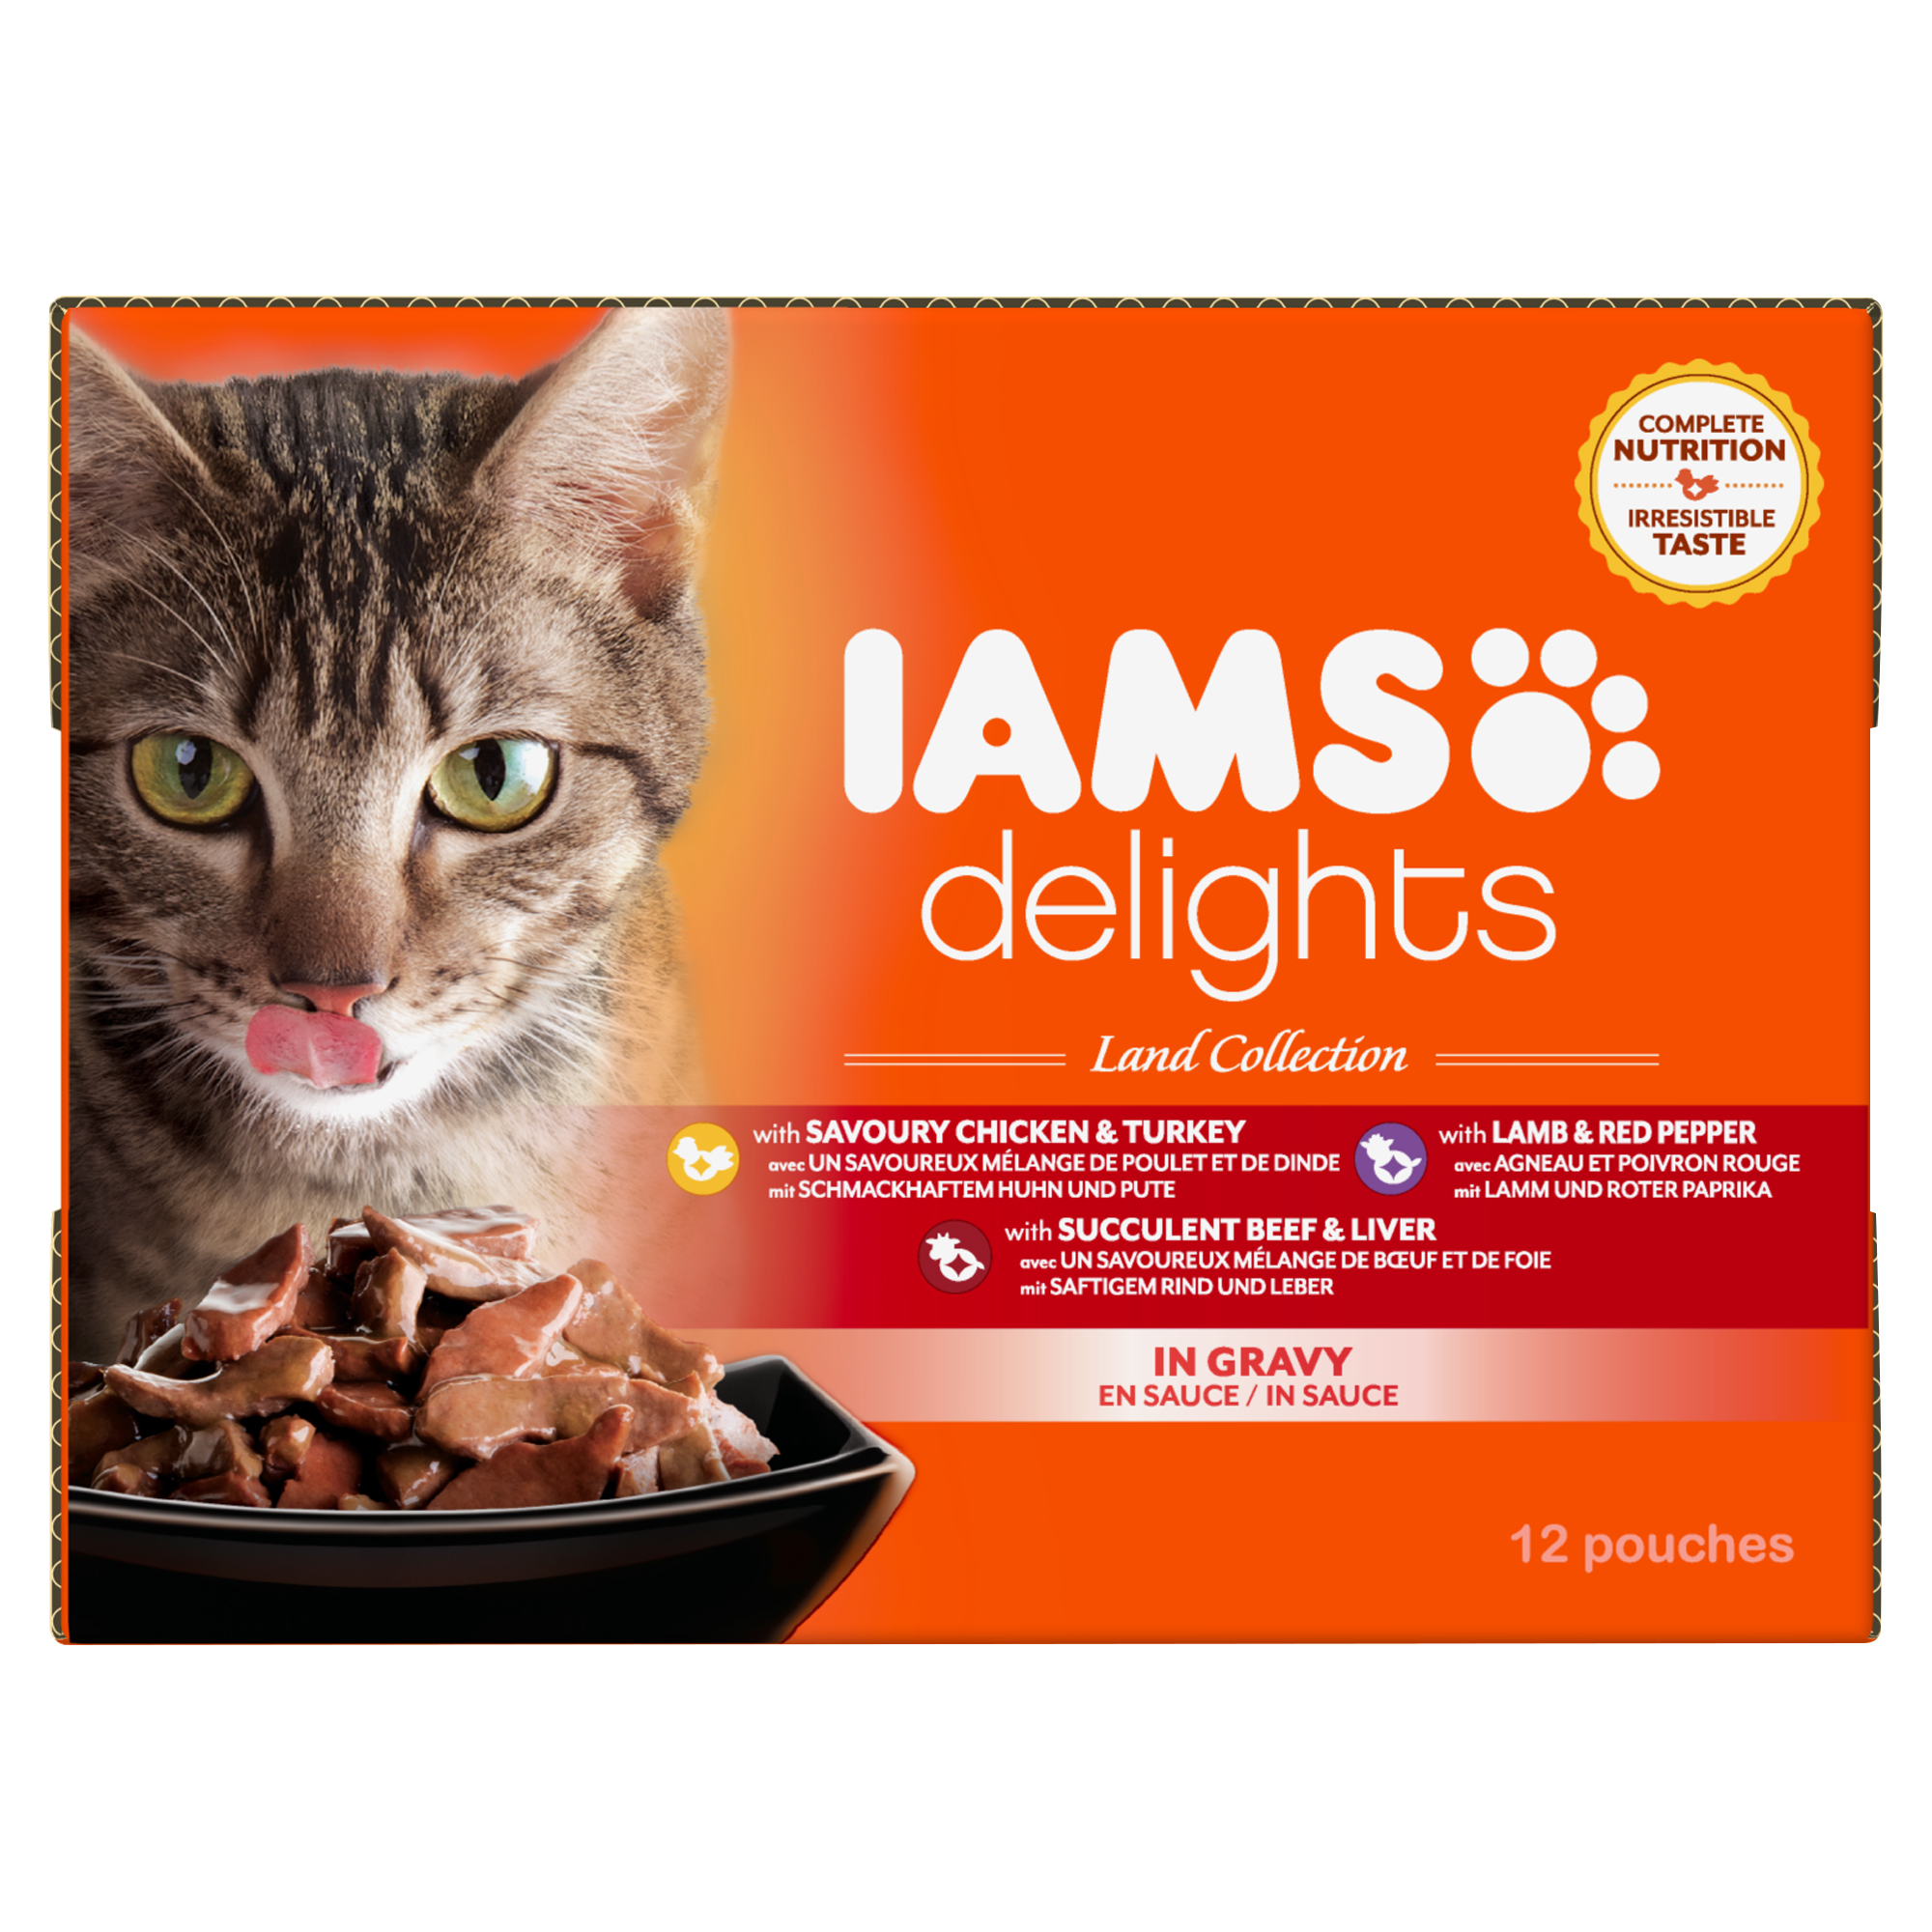 Iams pouch 12-pack land collection in gravy - Product shot